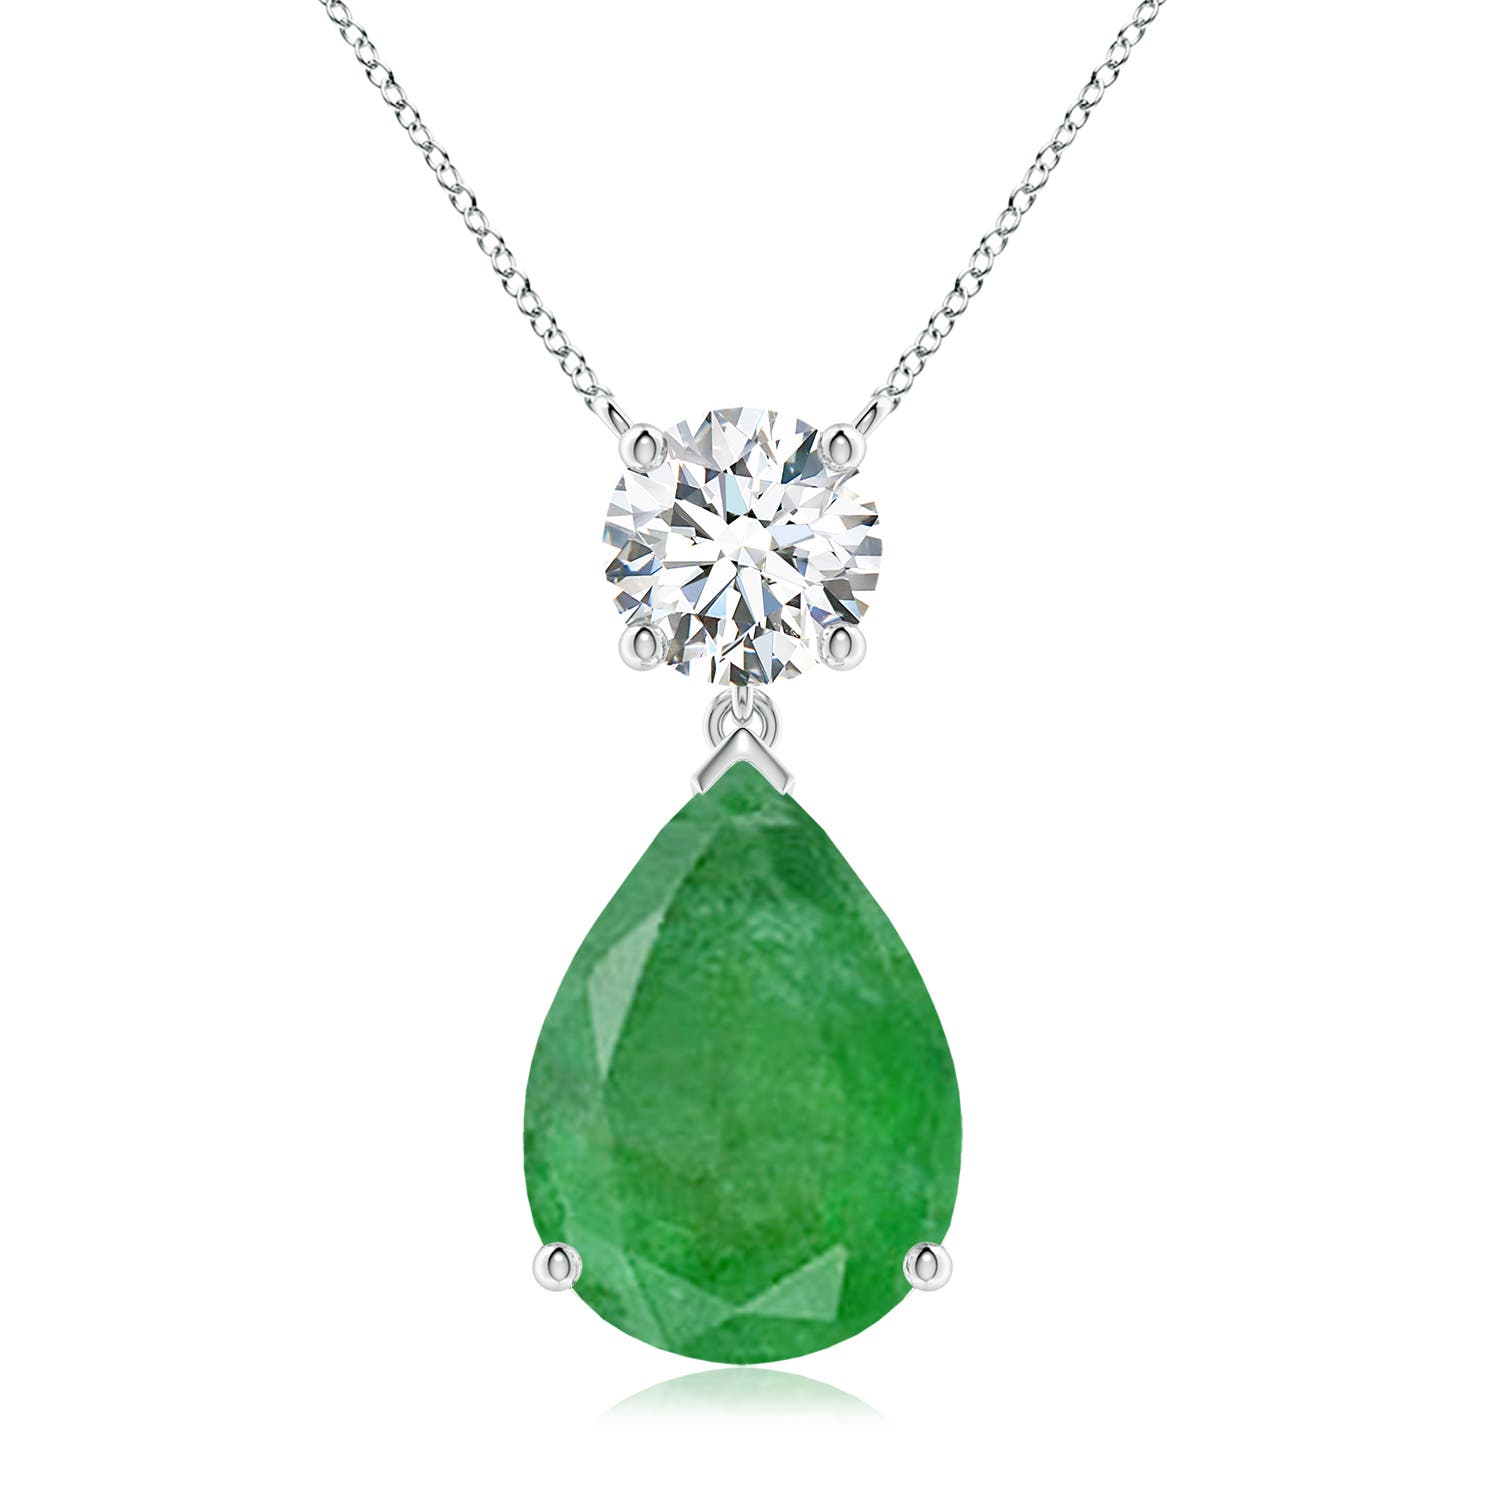 A - Emerald / 7.6 CT / 18 KT White Gold